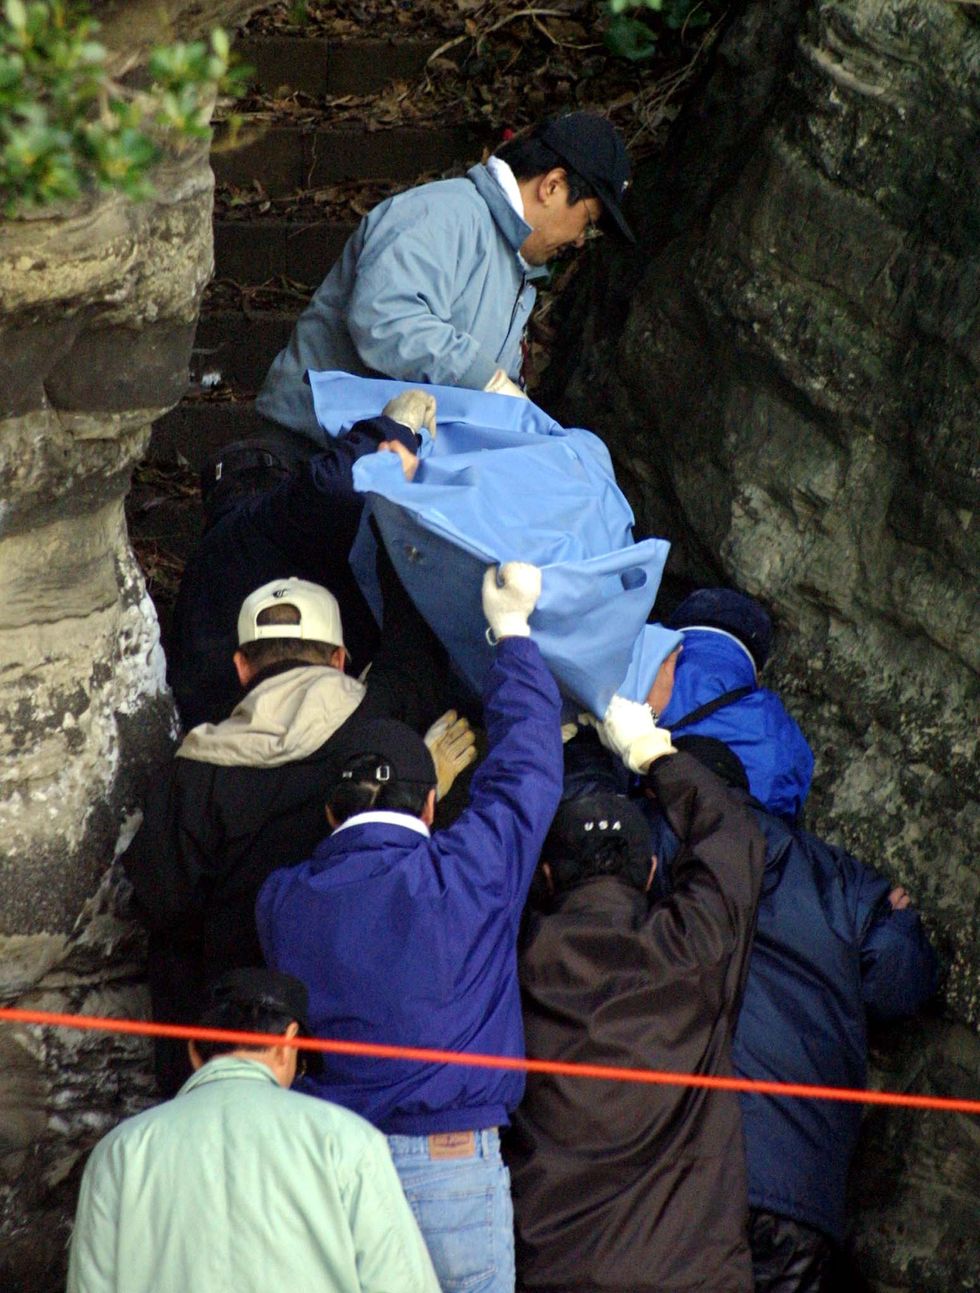 police officers get out of a cave carrying a sheet